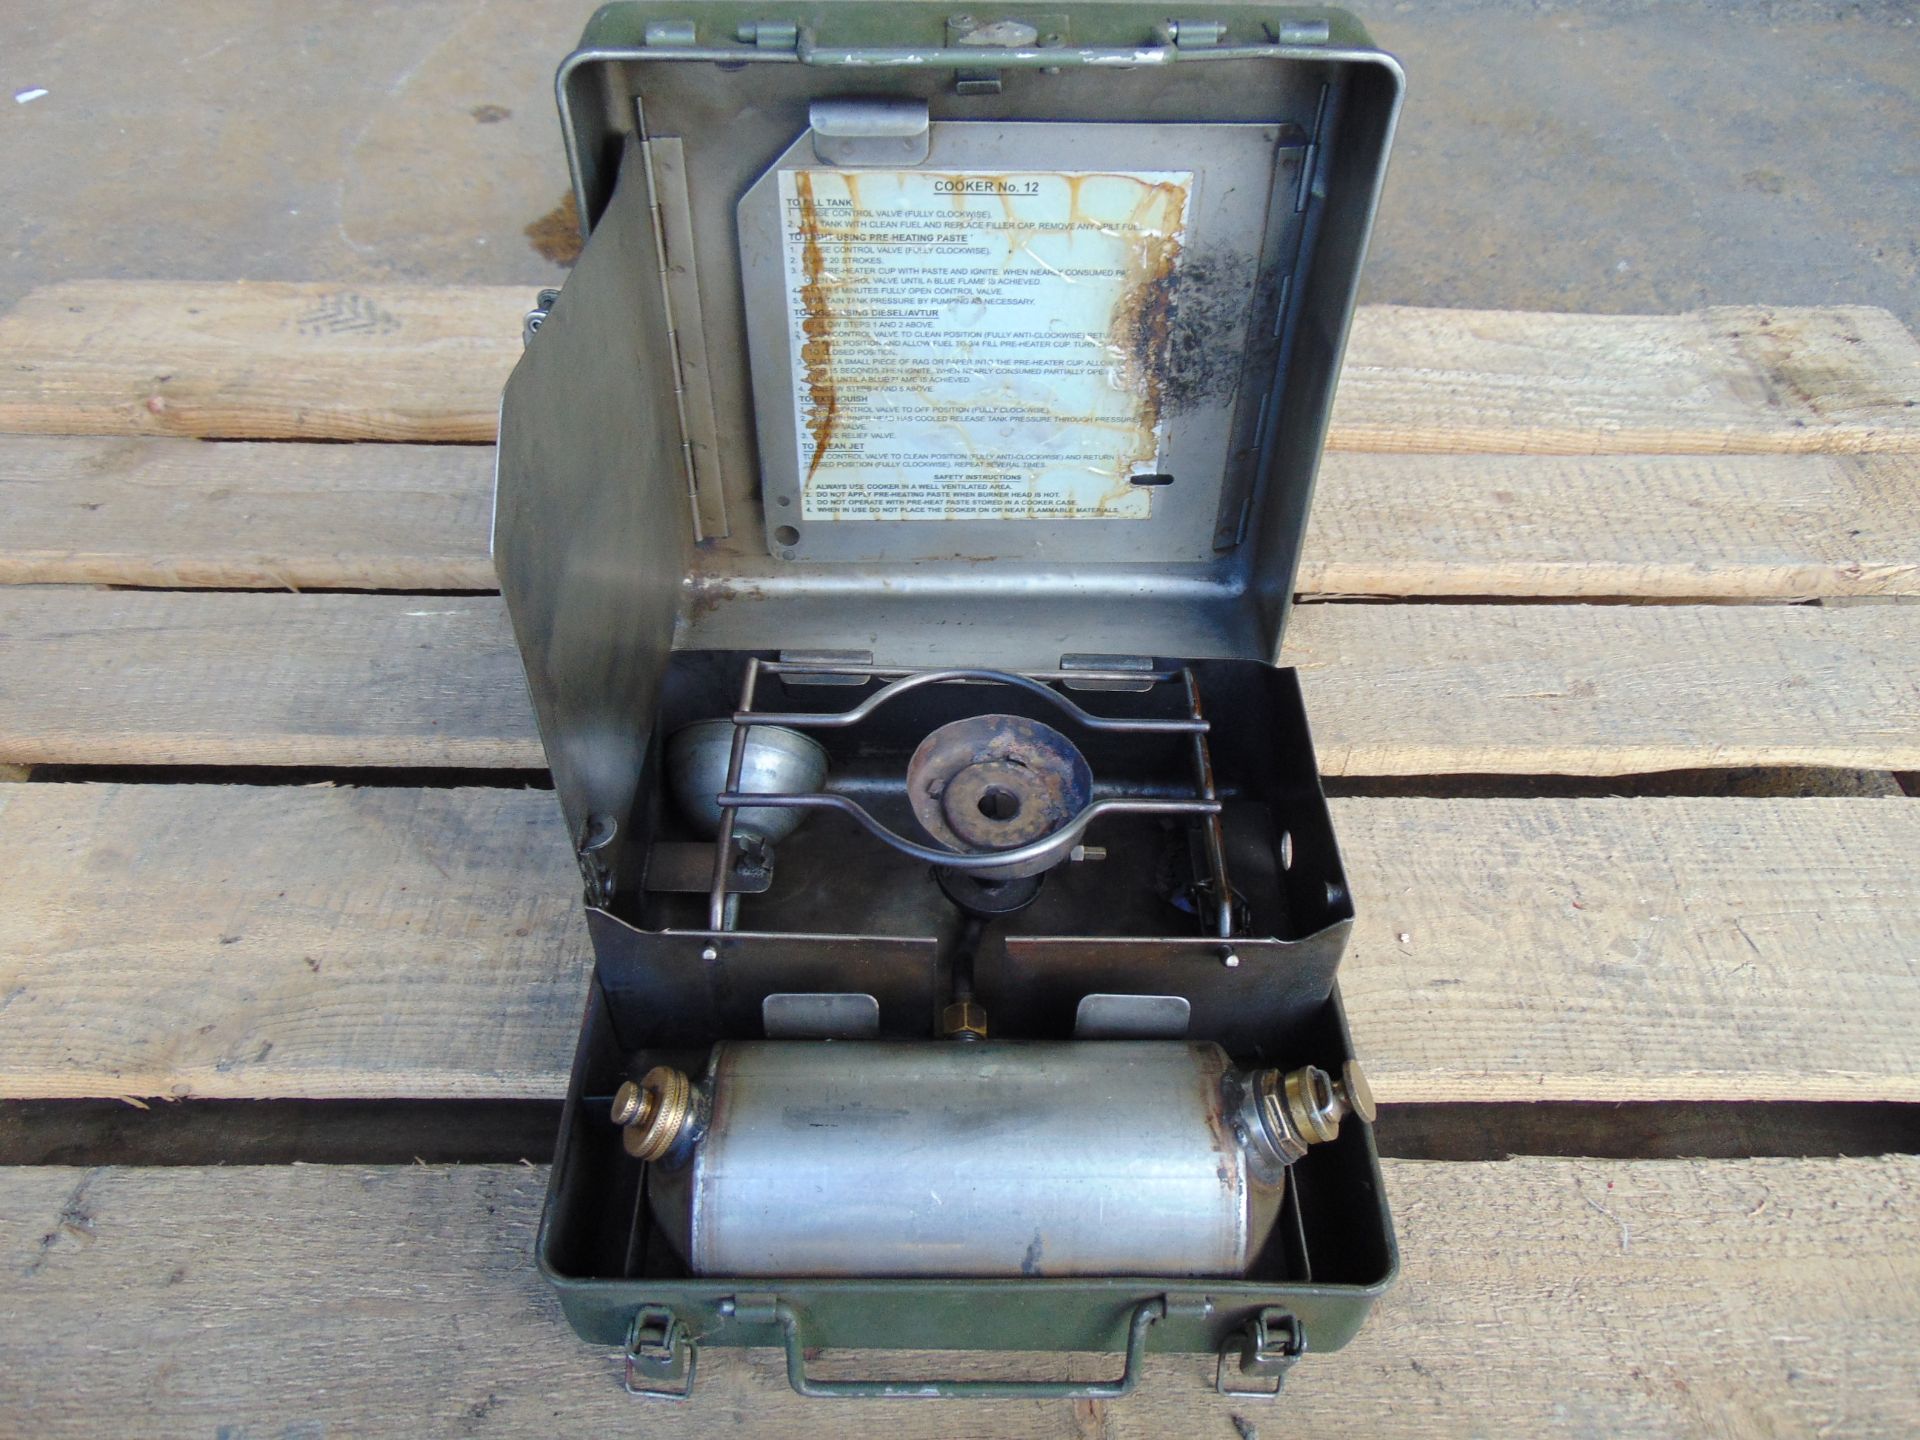 No. 12 Stove, Diesel Cooker/Camping Stove